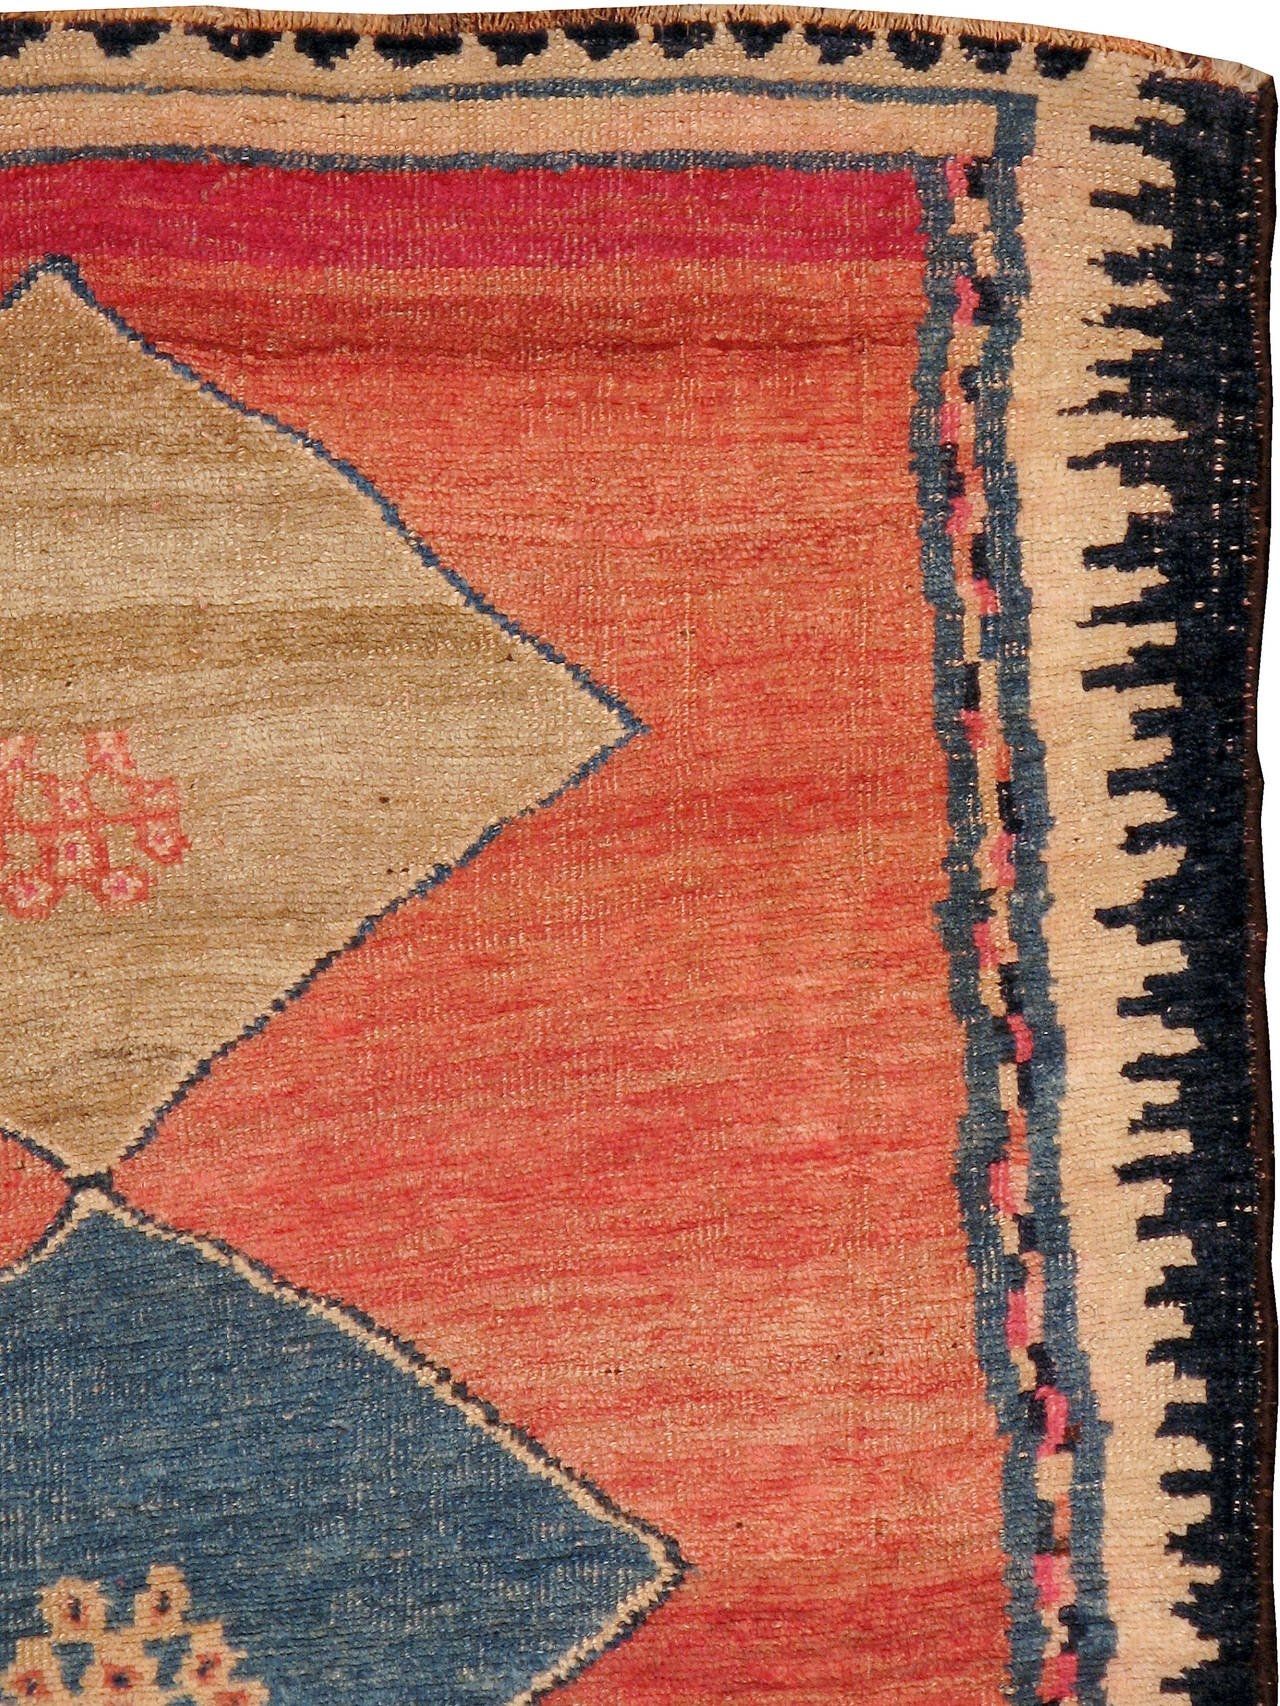 Antique Persian Gabbeh Rug For Sale At 1stdibs Throughout Gabbeh Rugs (View 4 of 15)